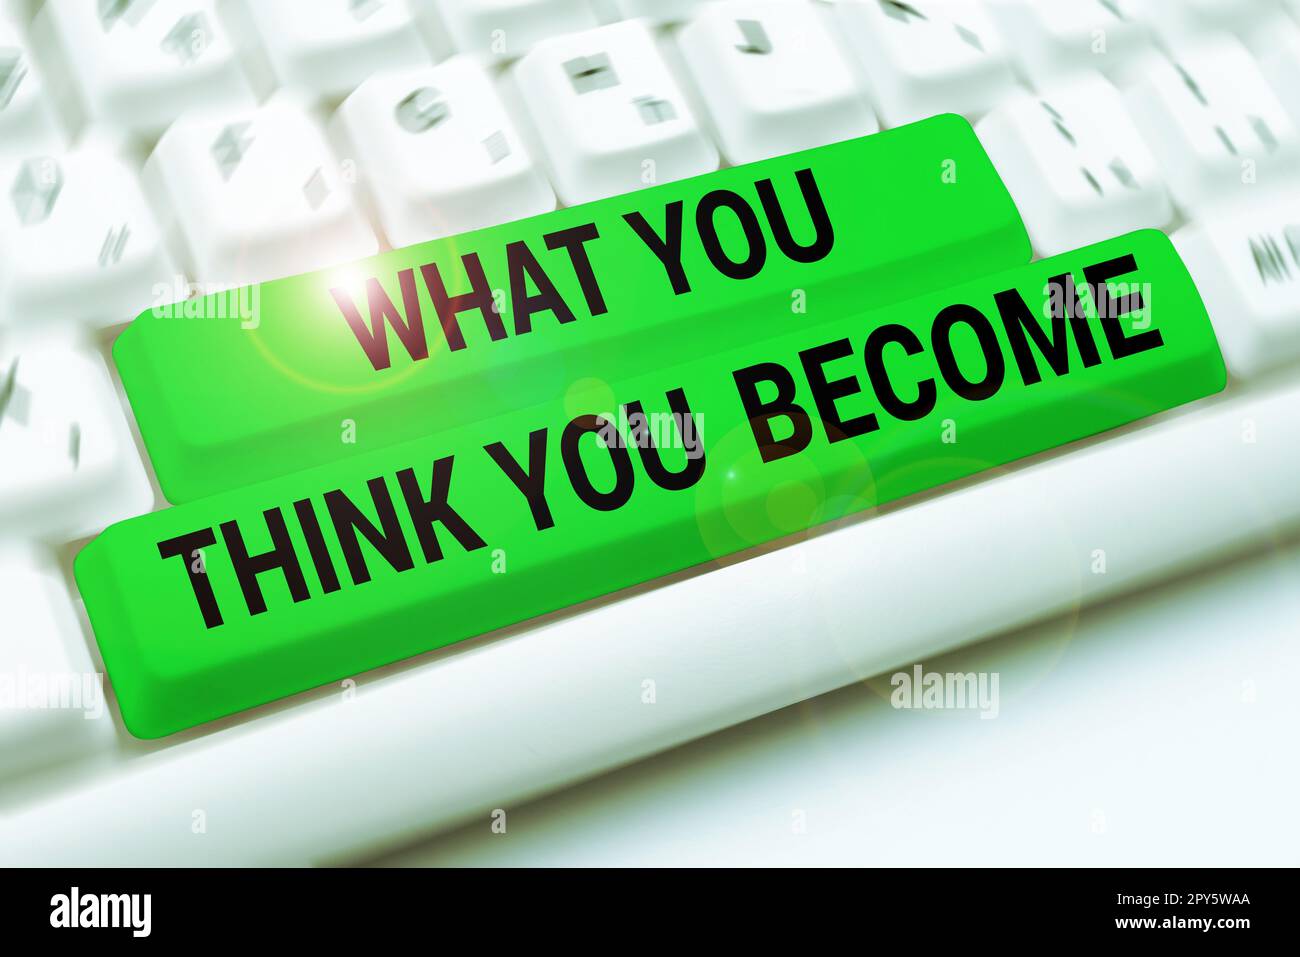 Sign displaying What You Think You Become. Concept meaning being successful and positive in life require good thoughts Stock Photo